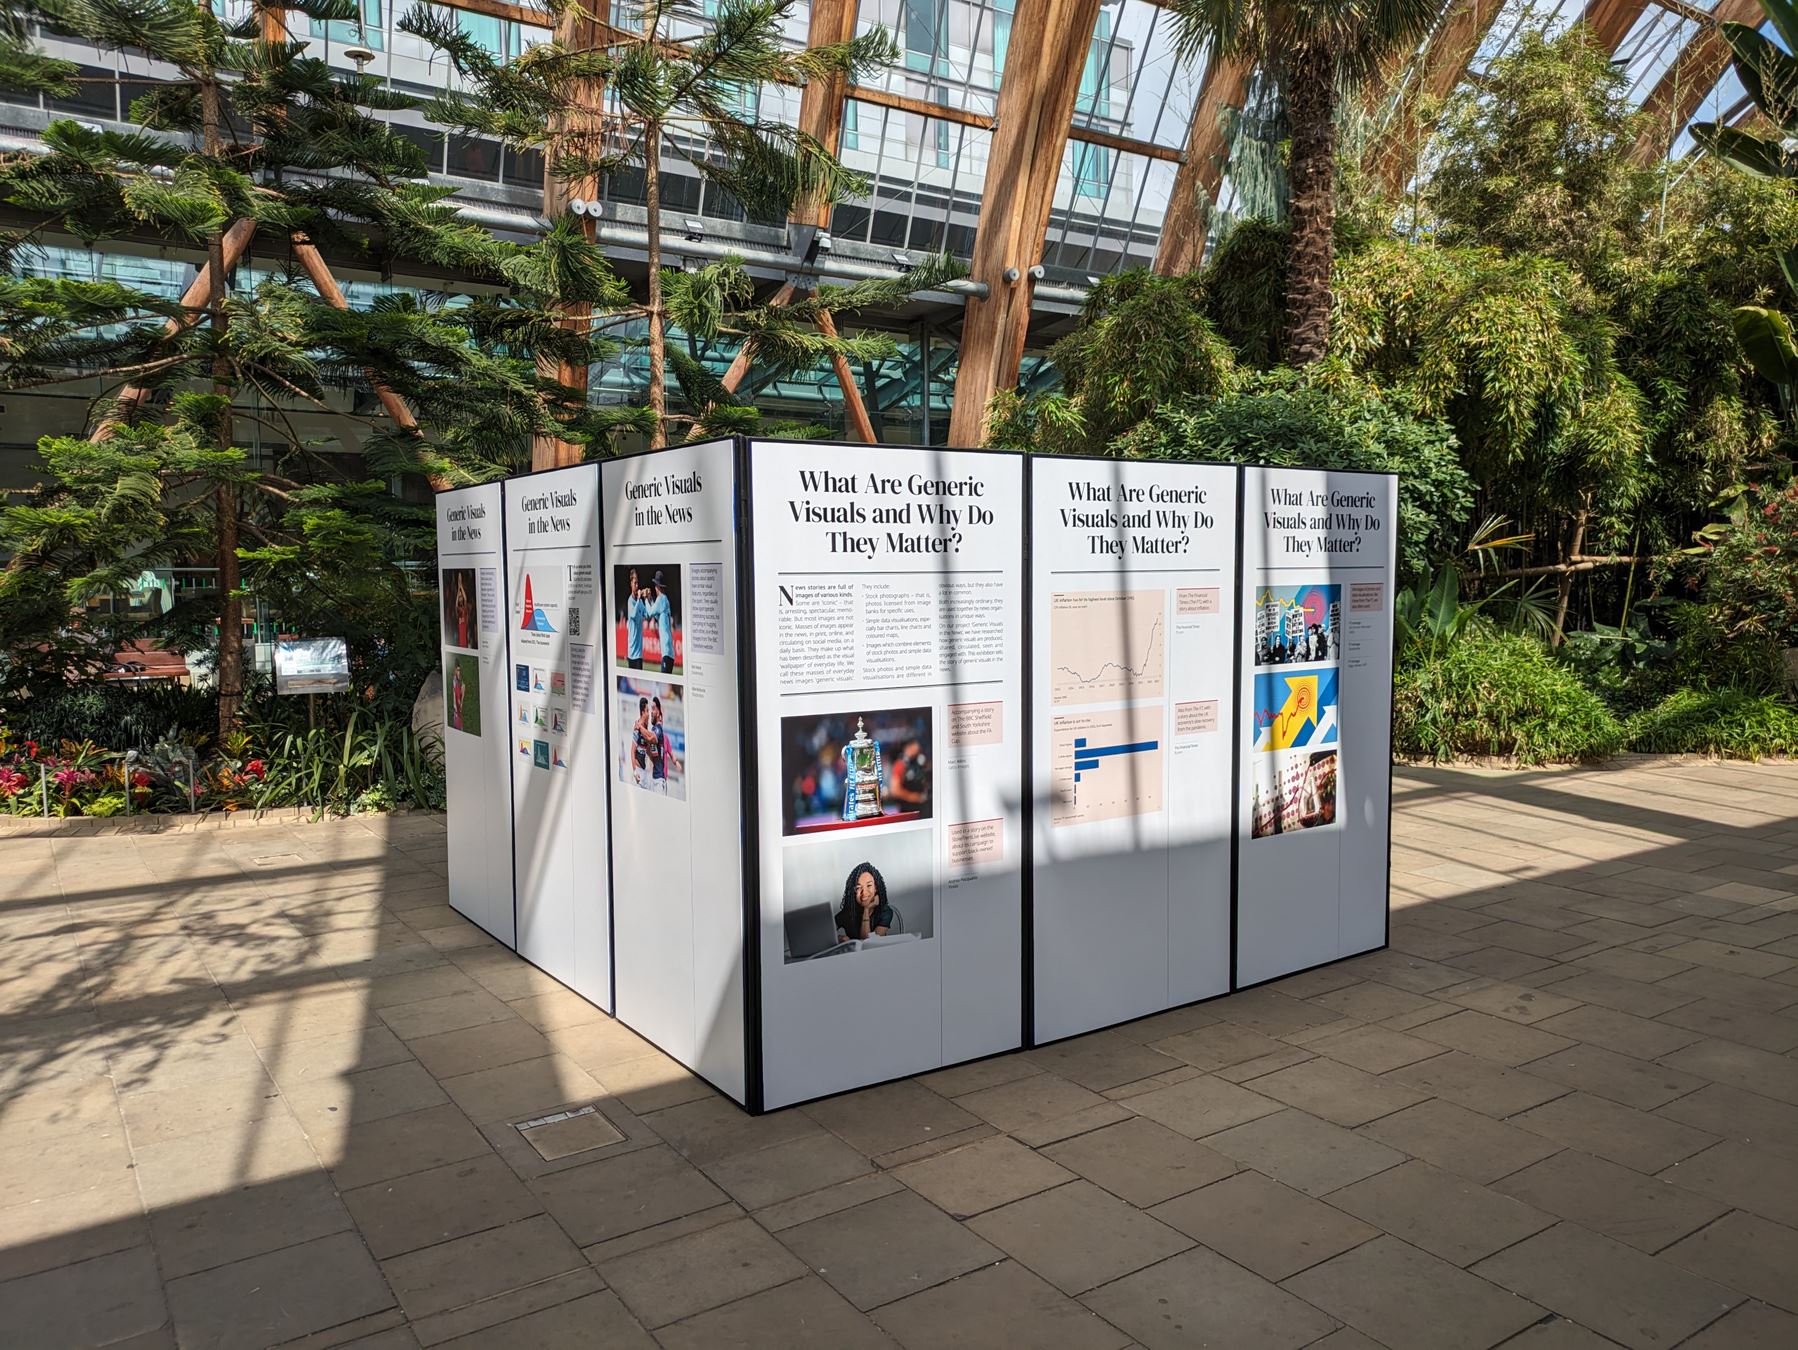 Image is a photograph of the Generic Visuals in the News exhibition installed in its location at the Winter Garden in Sheffield city centre. The exhibition is displayed on a series of white panels arranged in a square-like configuration. The backdrop is of vegatation; trees and the roof of the hothouse. There is a shadow cast onto the exhibition panels.